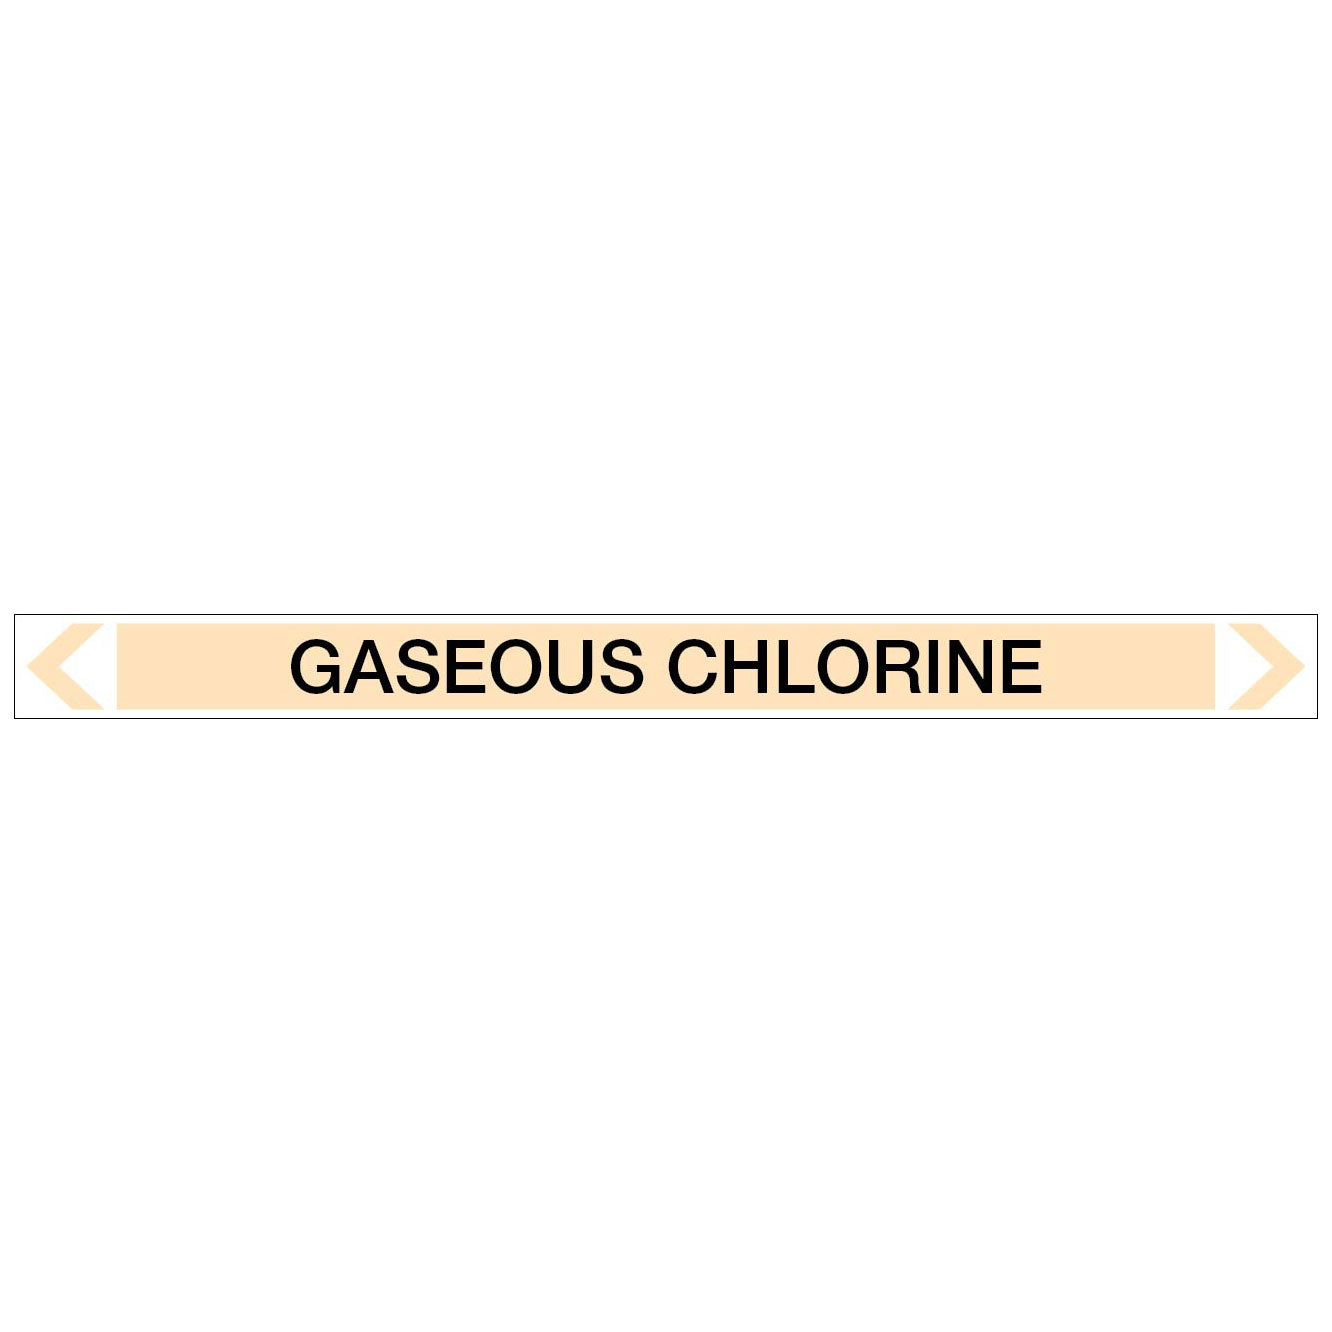 Gases - Gaseous Chlorine - Pipe Marker Sticker